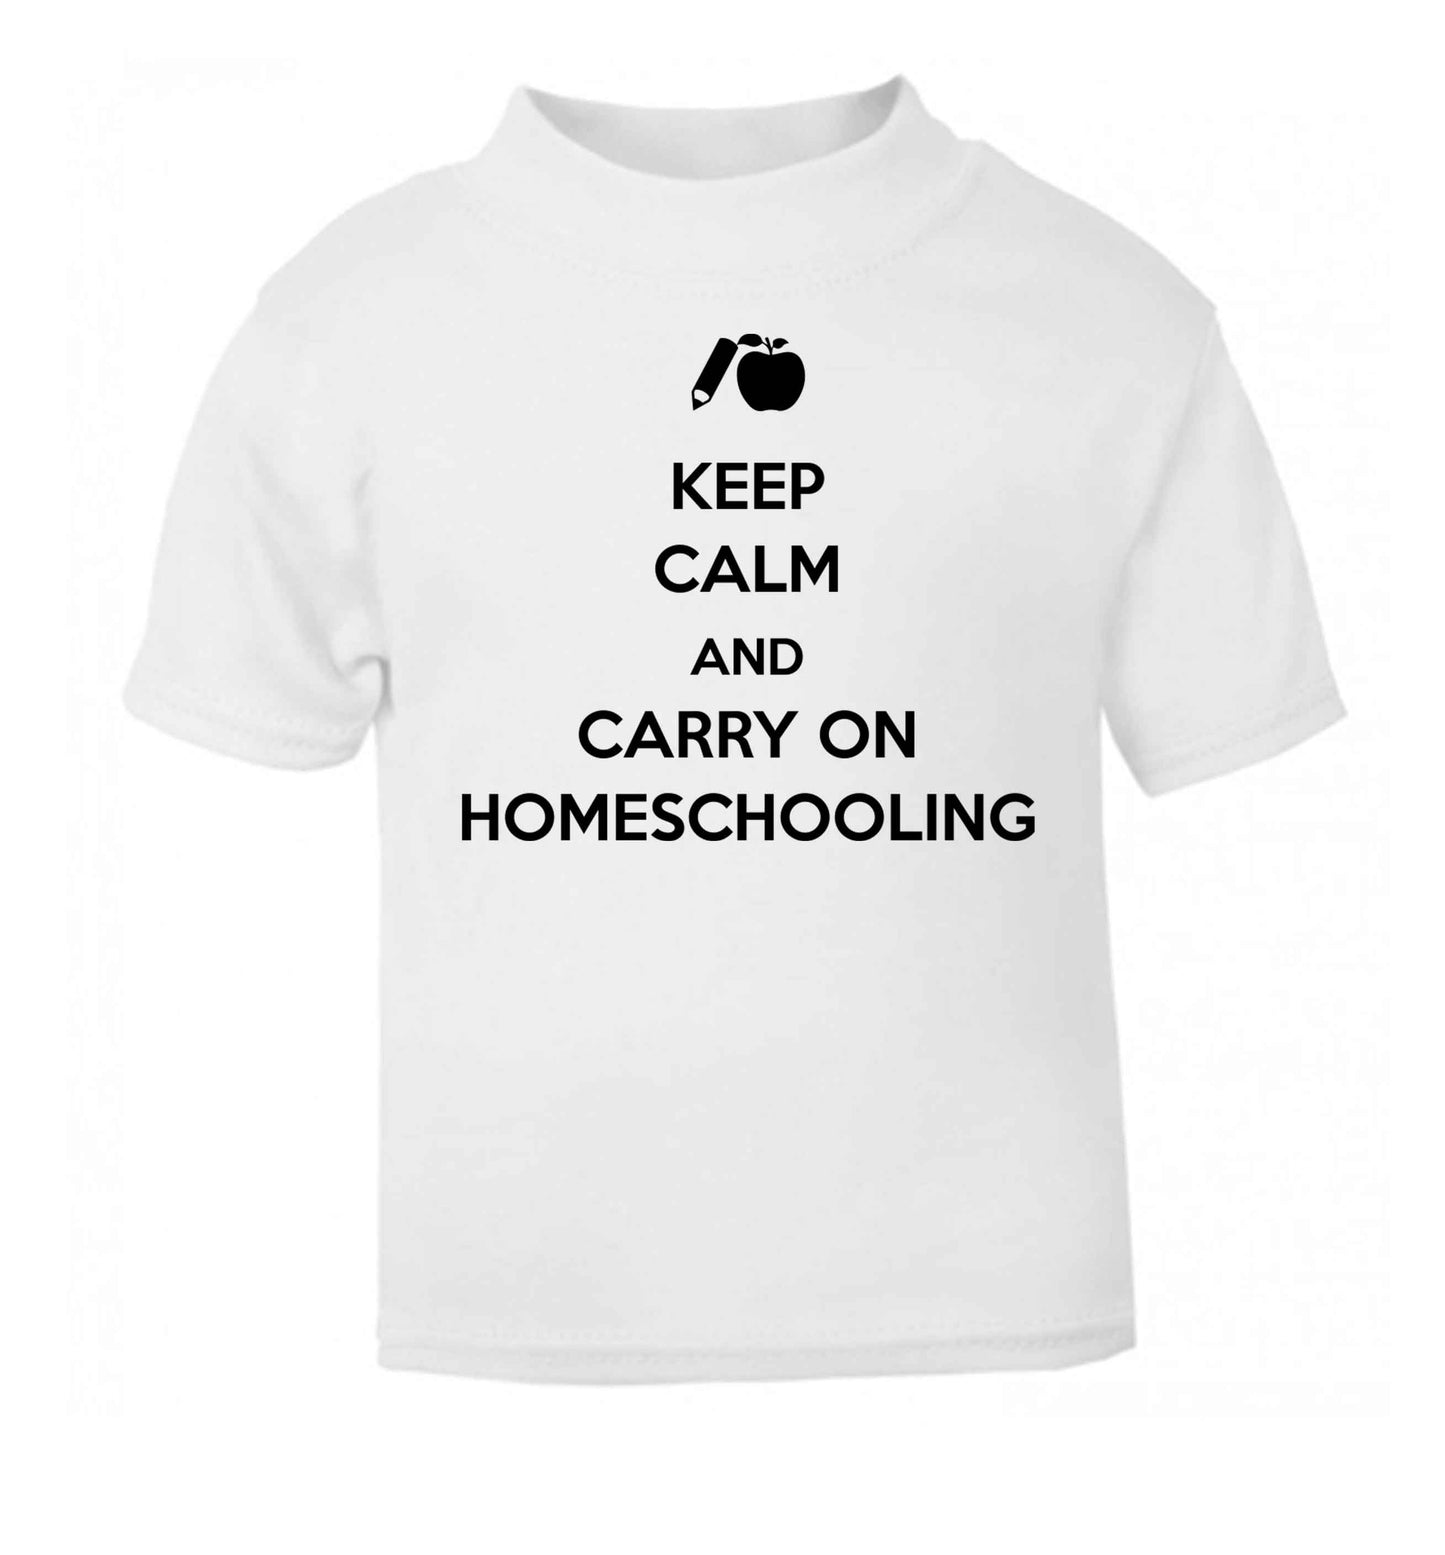 Keep calm and carry on homeschooling white Baby Toddler Tshirt 2 Years